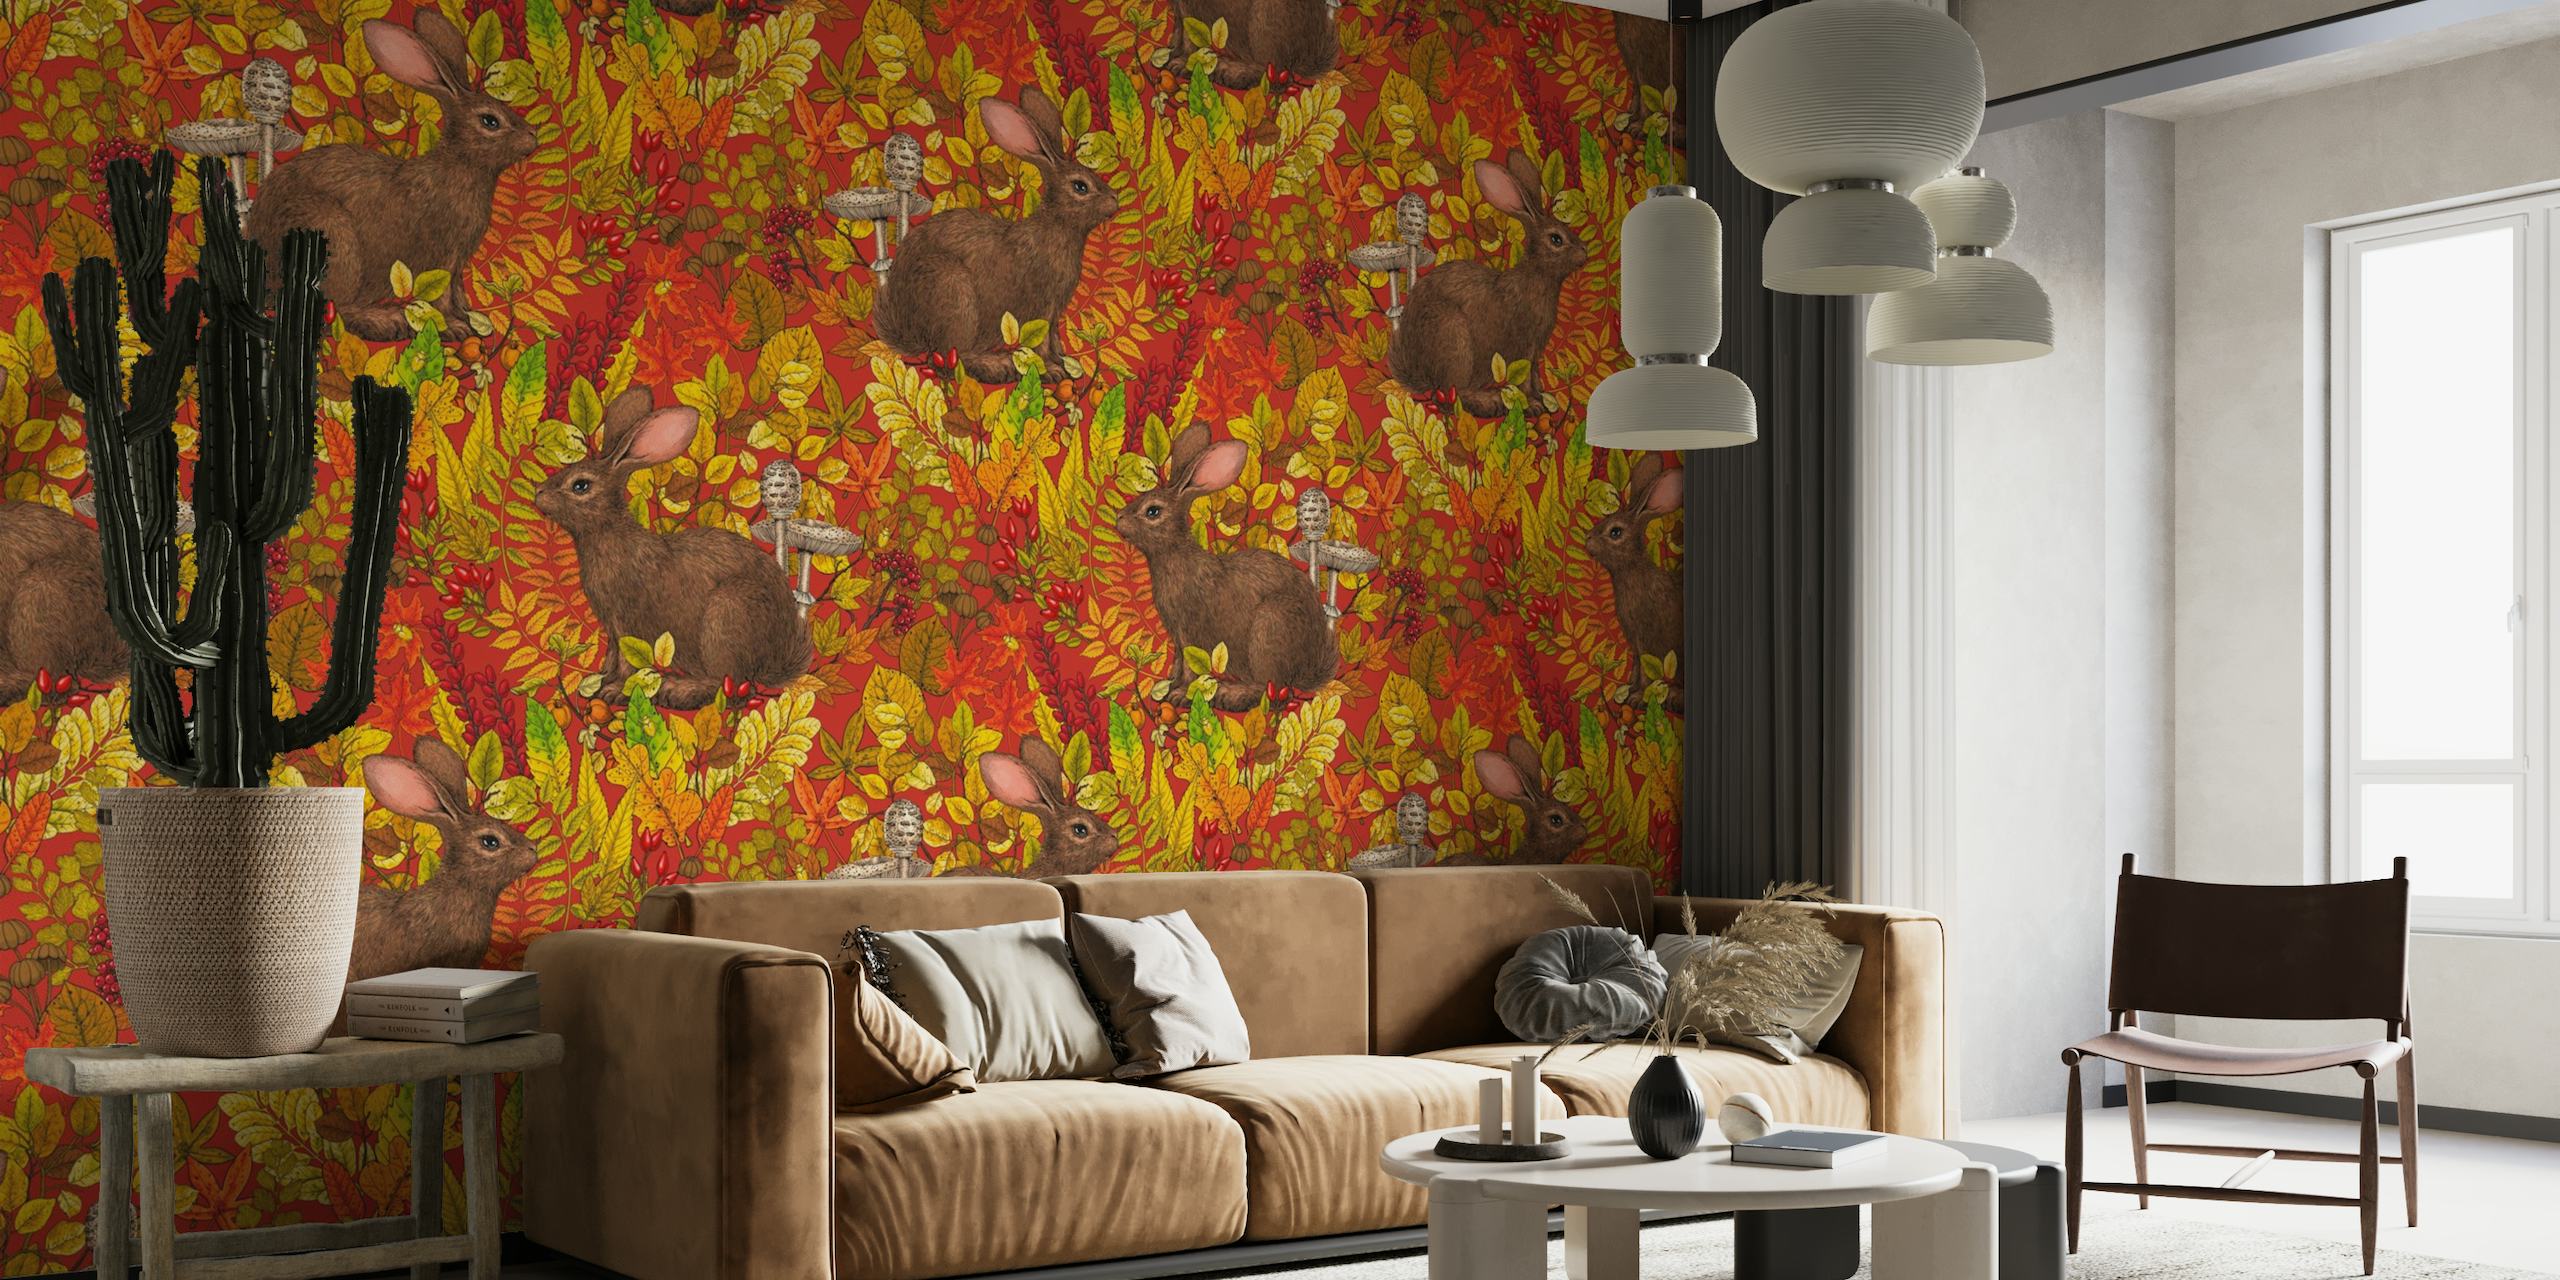 Autumn Rabbit on Red wall mural with rabbits and fall leaves